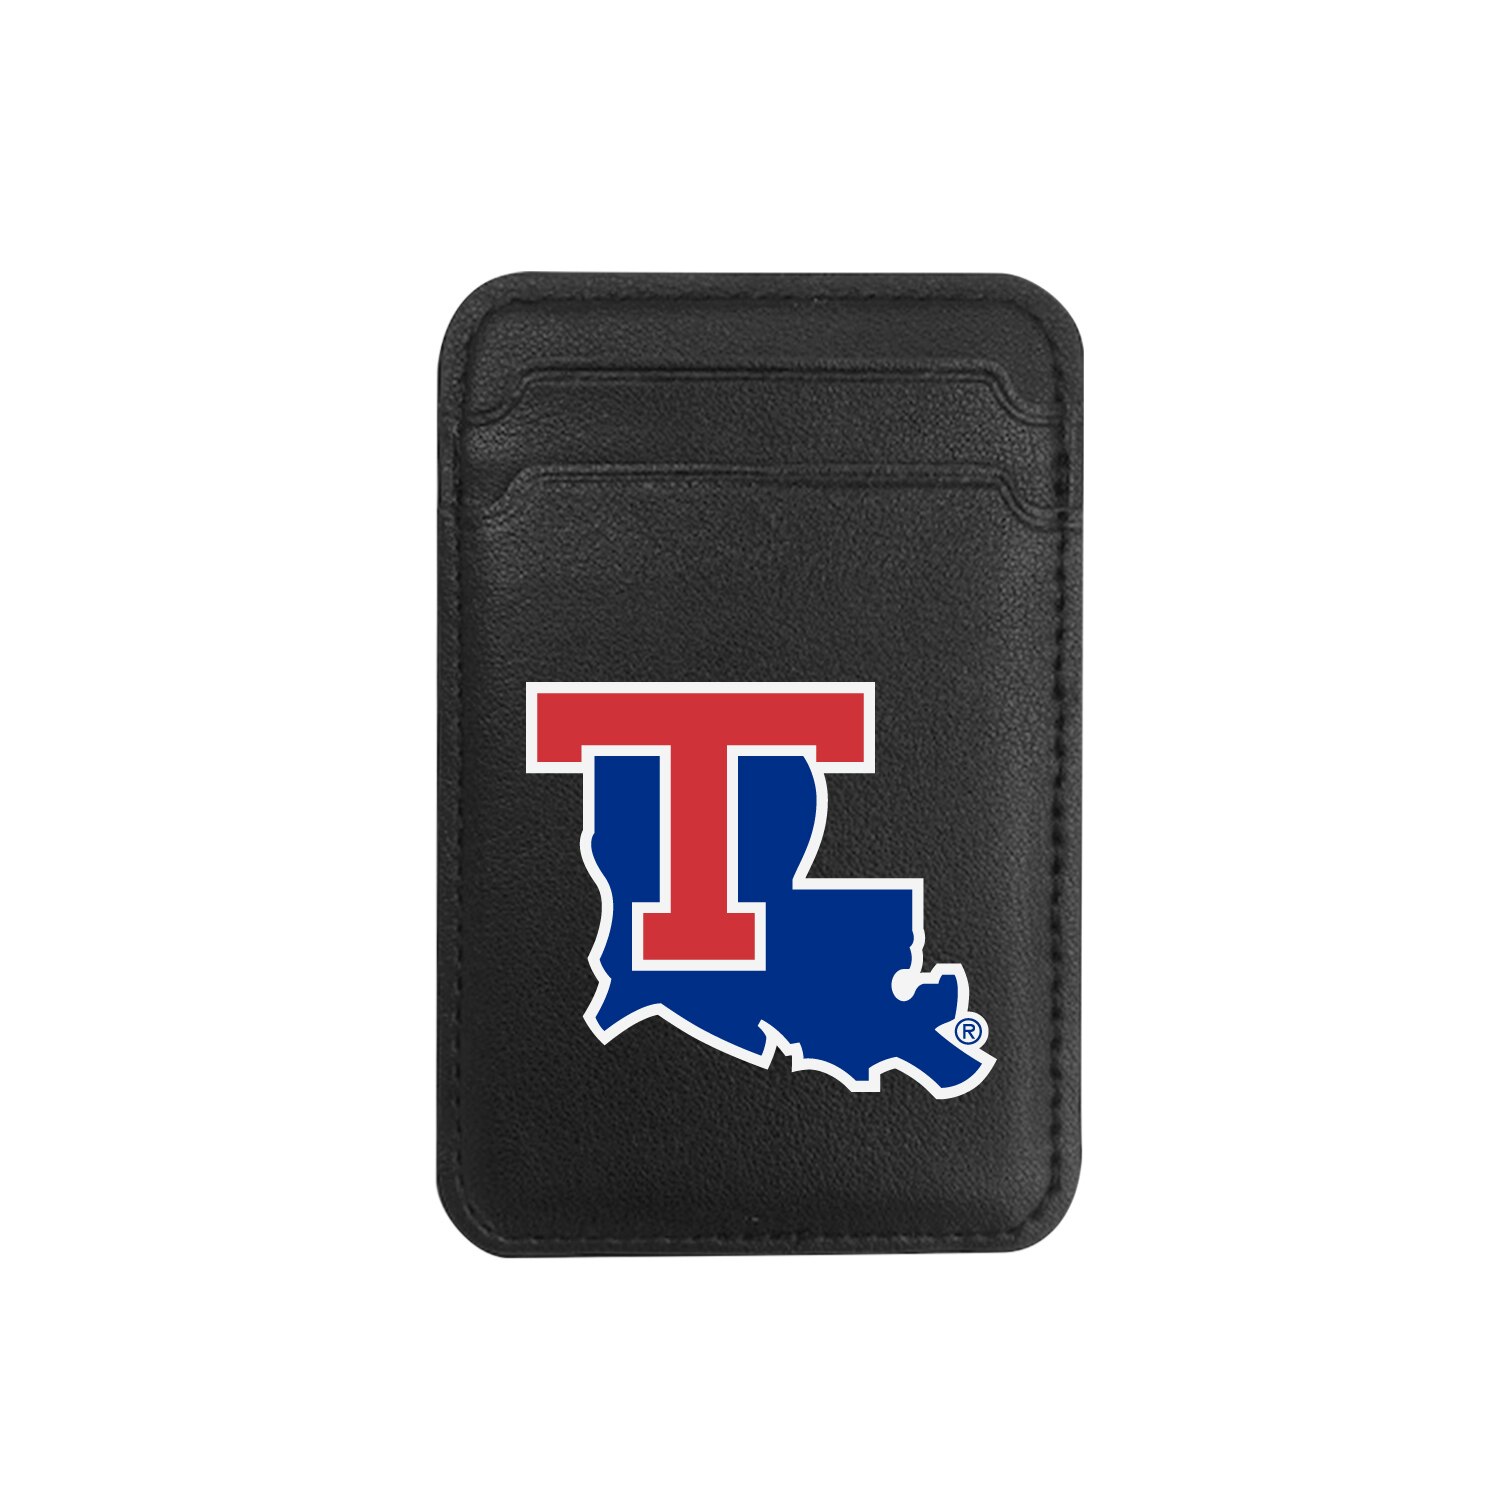 Louisiana Tech University - Leather Wallet Sleeve (Top Load, Mag Safe), Black, Classic V1